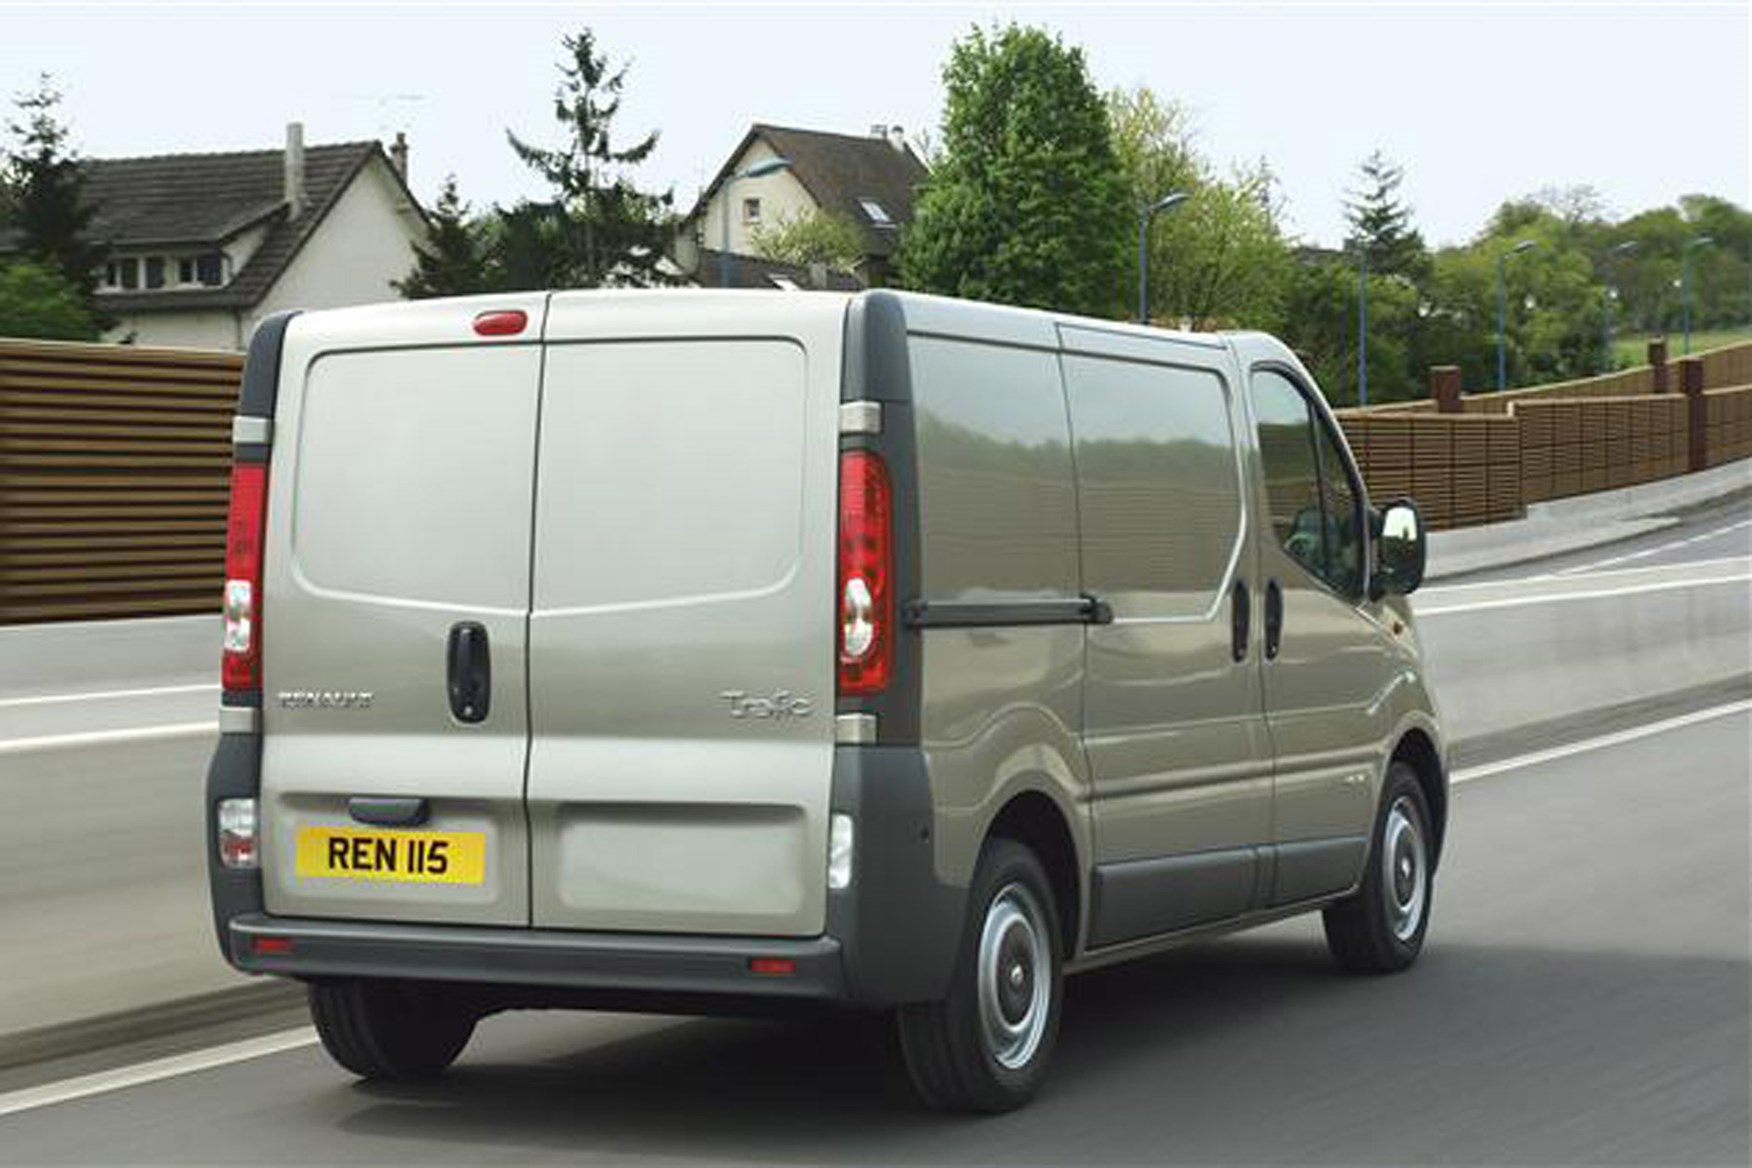 Renault Trafic 2001-2014 review on Parkers Vans - rear exterior